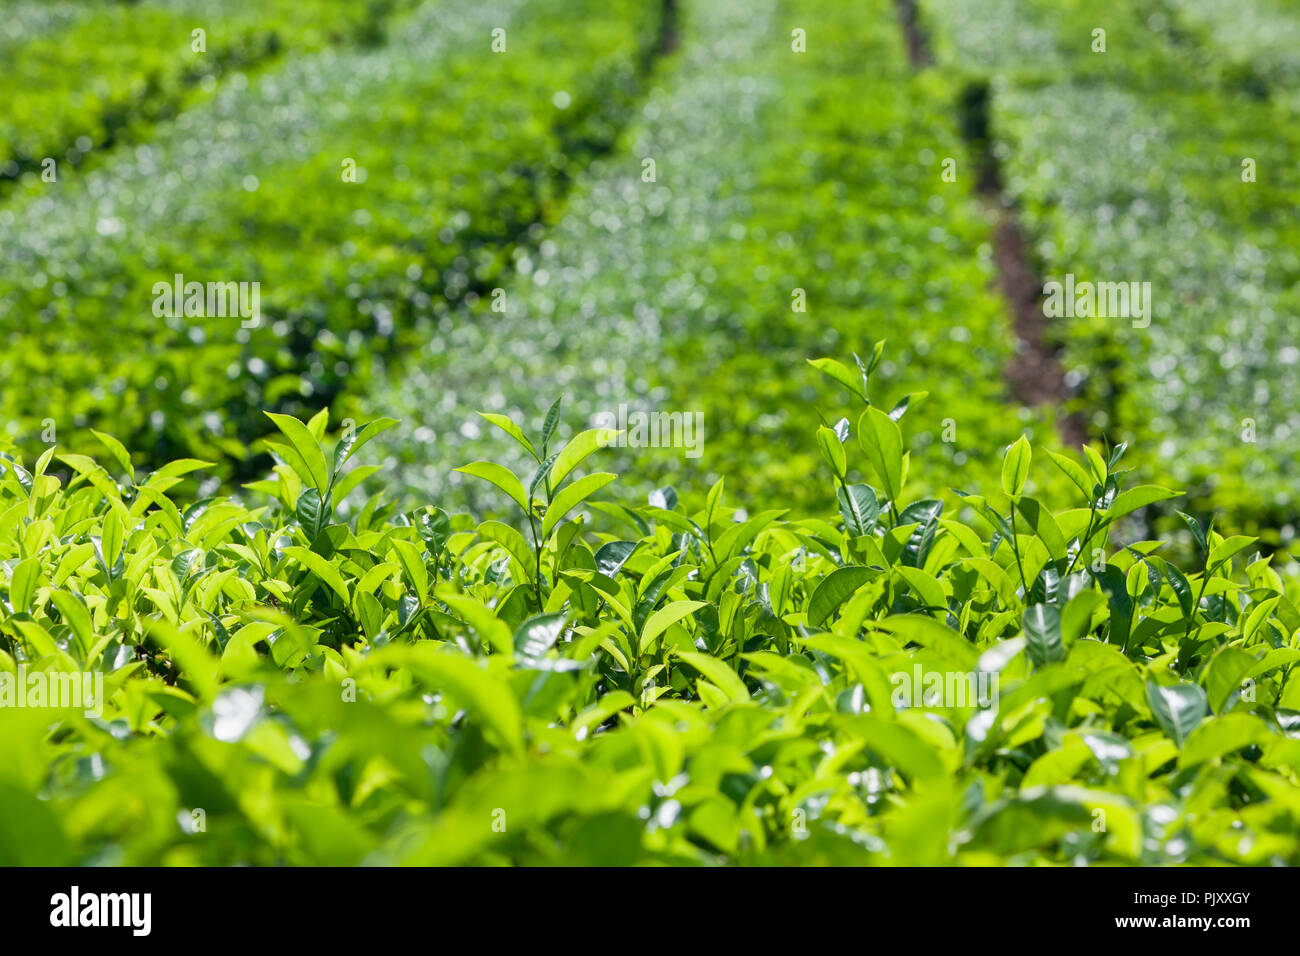 Tea leaves growing on top of shrub knowing as flush. Used to produce best sorts of white, green and black tea. Highland plantation background. Stock Photo